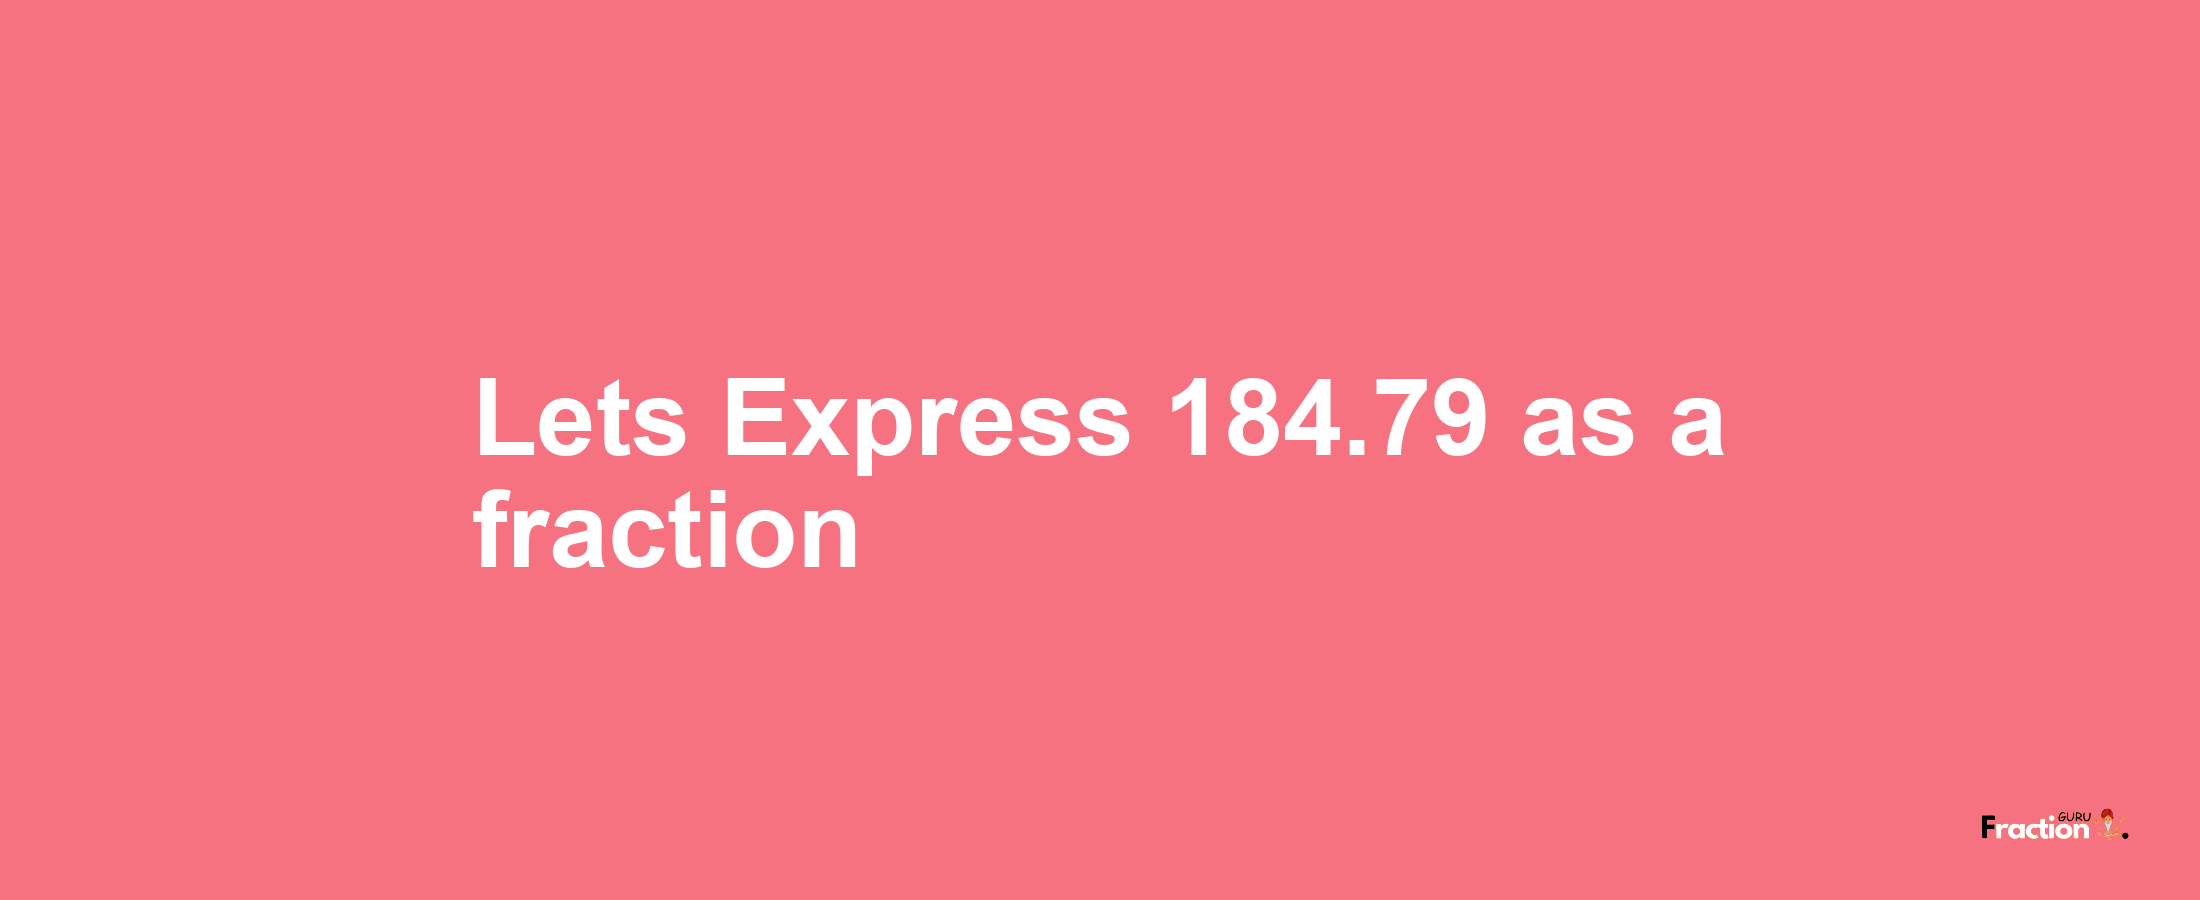 Lets Express 184.79 as afraction